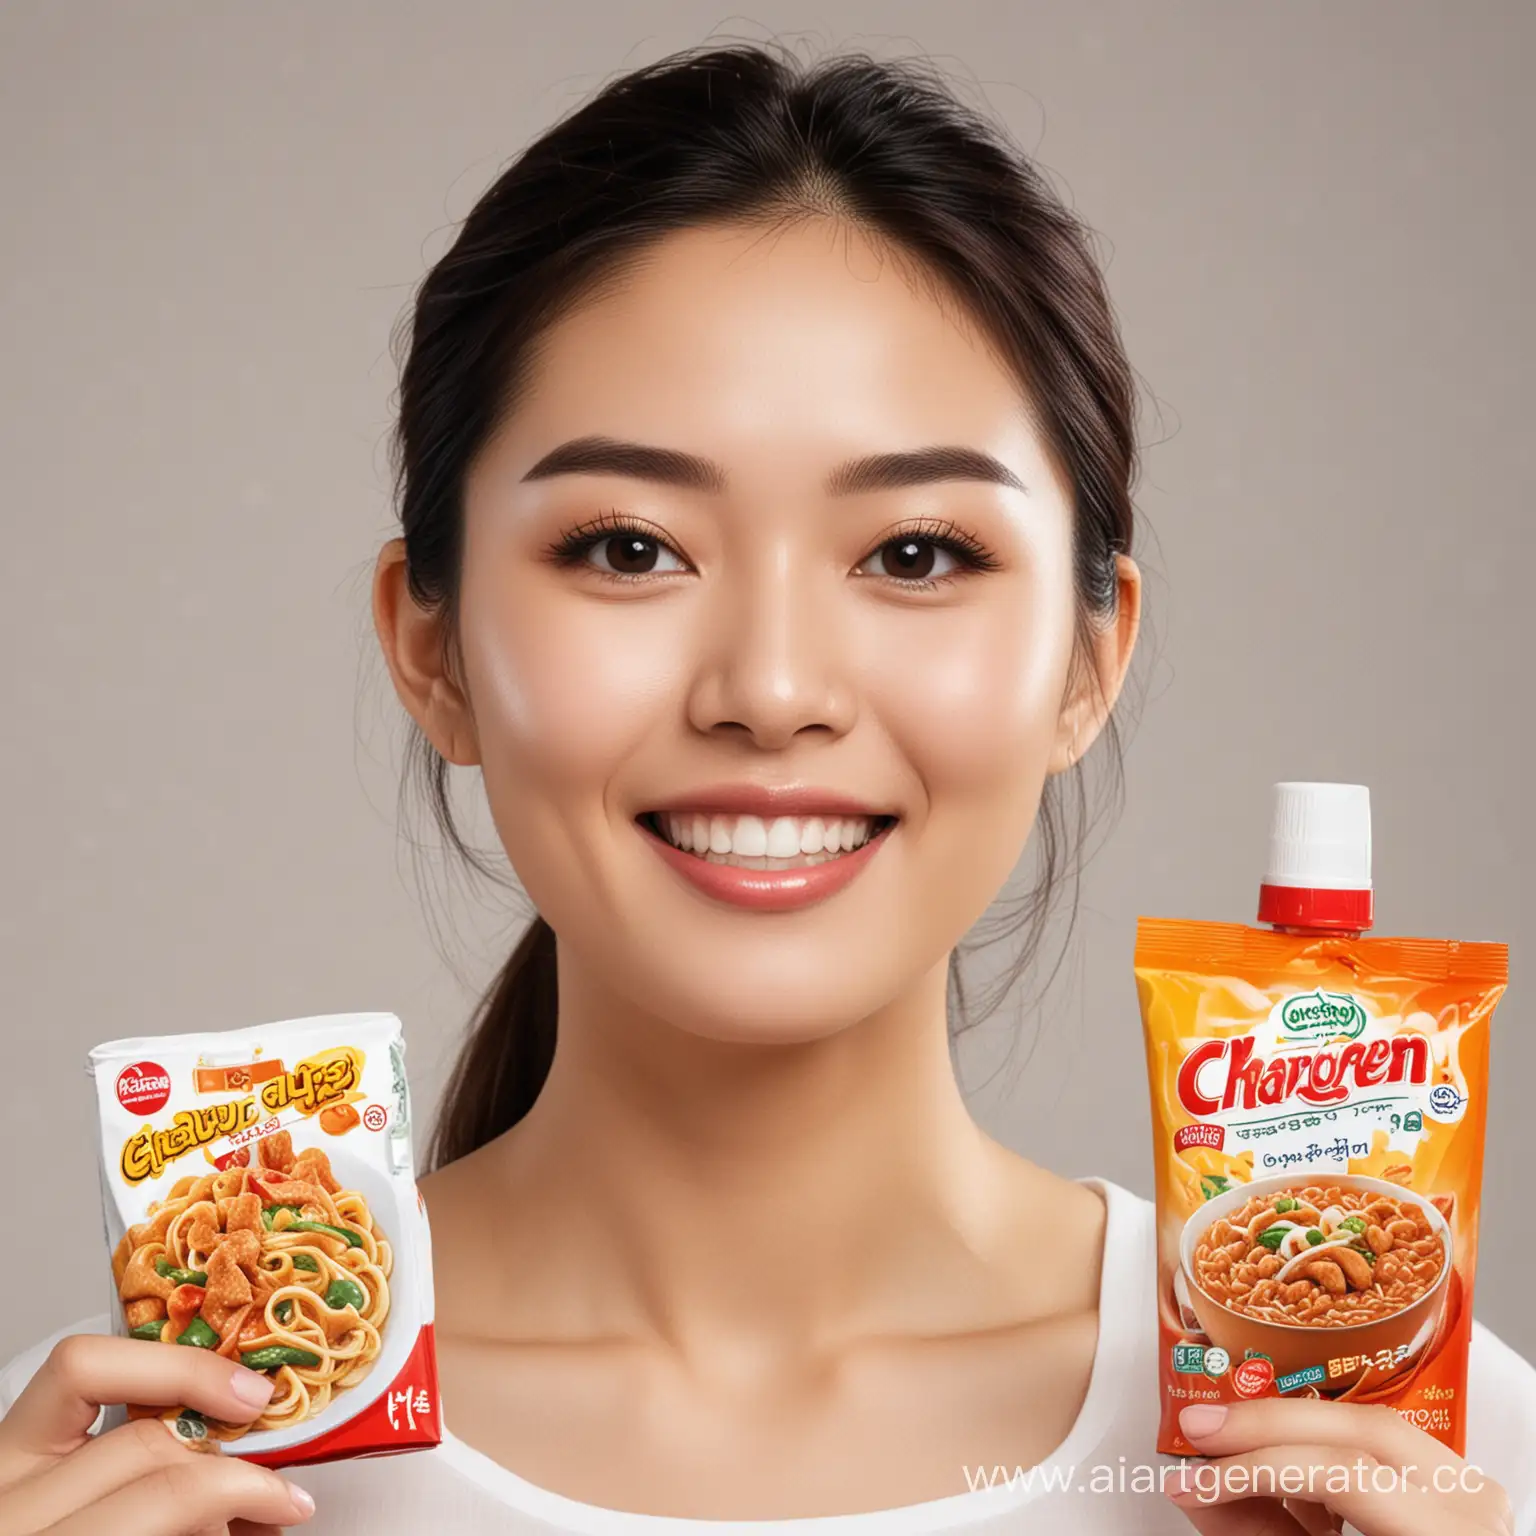 Charoen-Pokphand-Foods-Mascot-with-Friendly-Face-and-Lively-Body